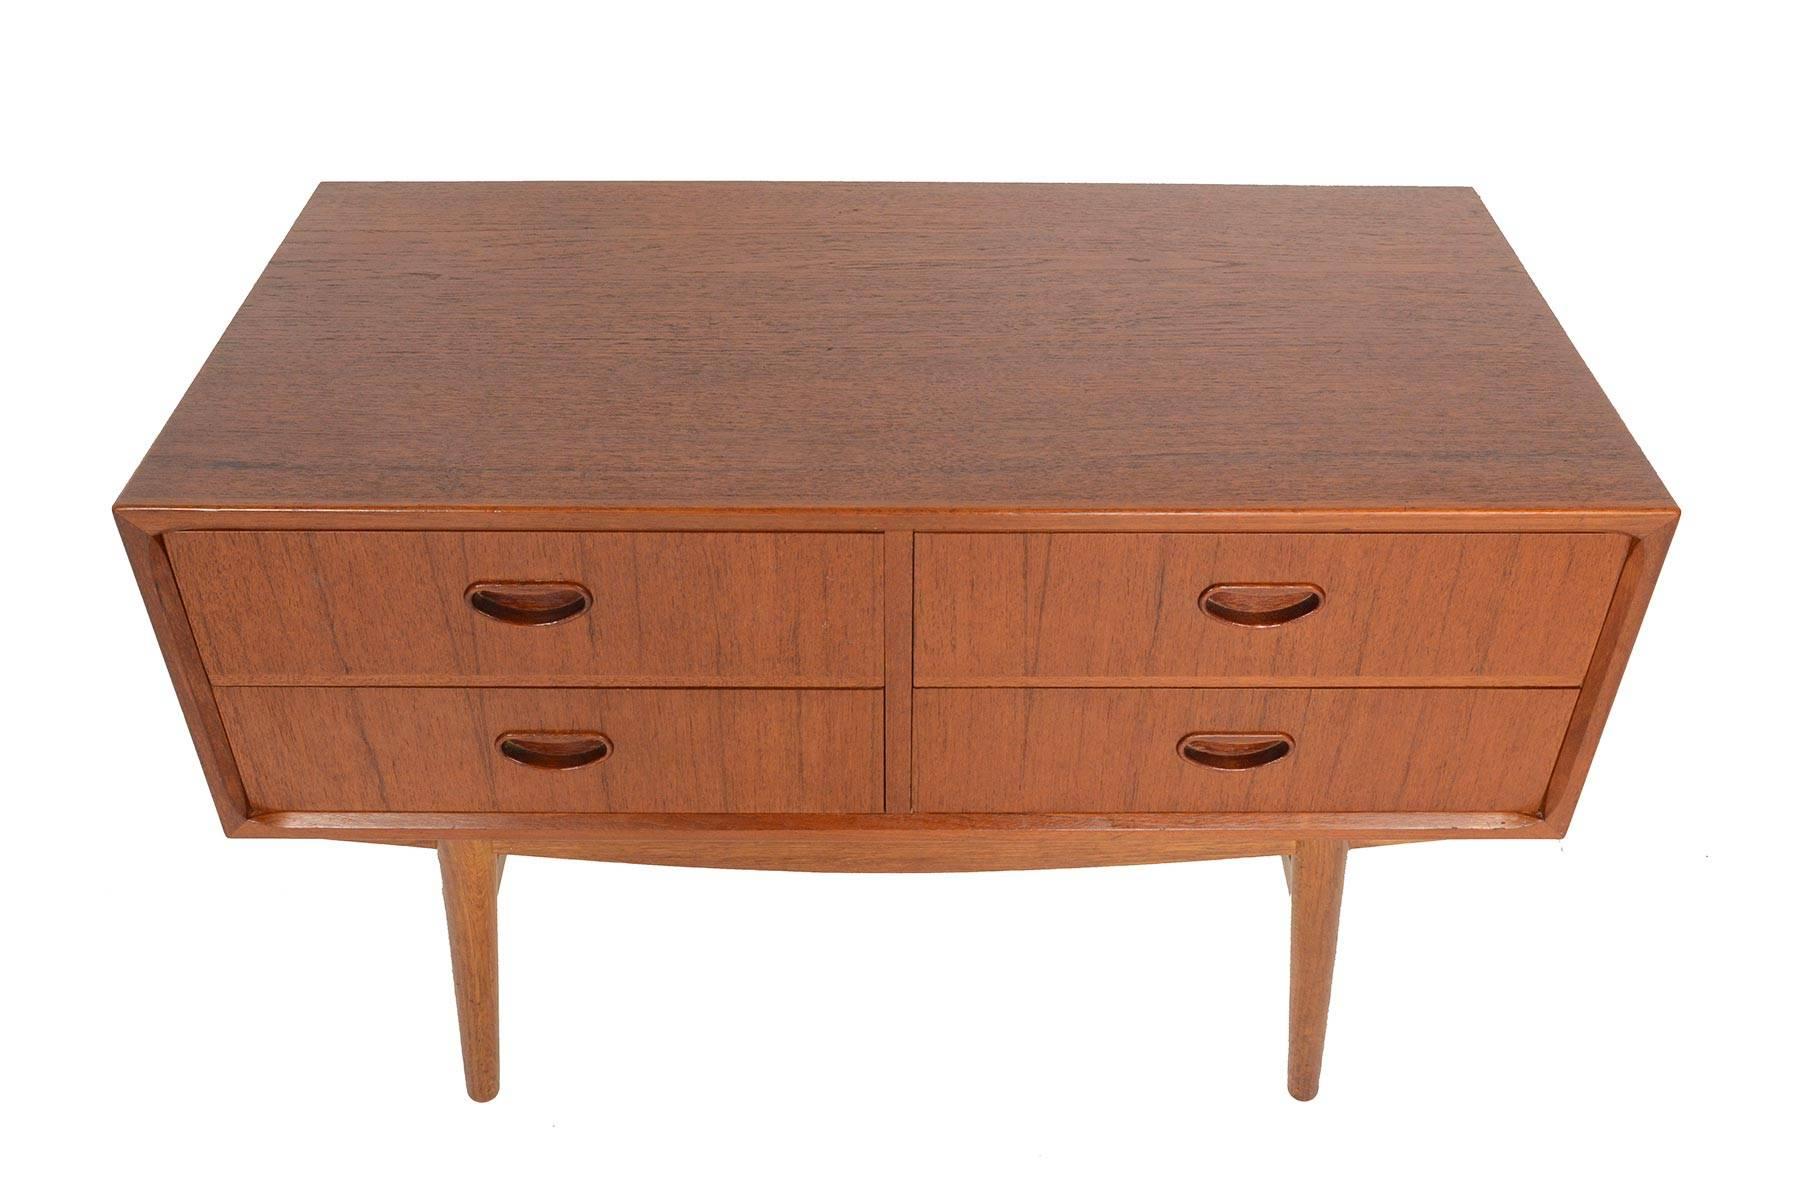 This wonderful Danish modern midcentury four-drawer gentleman's chest is cased in teak but stands on contrasting oak base. Excellent for use as larger nightstand, small dresser, or entry chest, this well crafted piece features four drawers accented